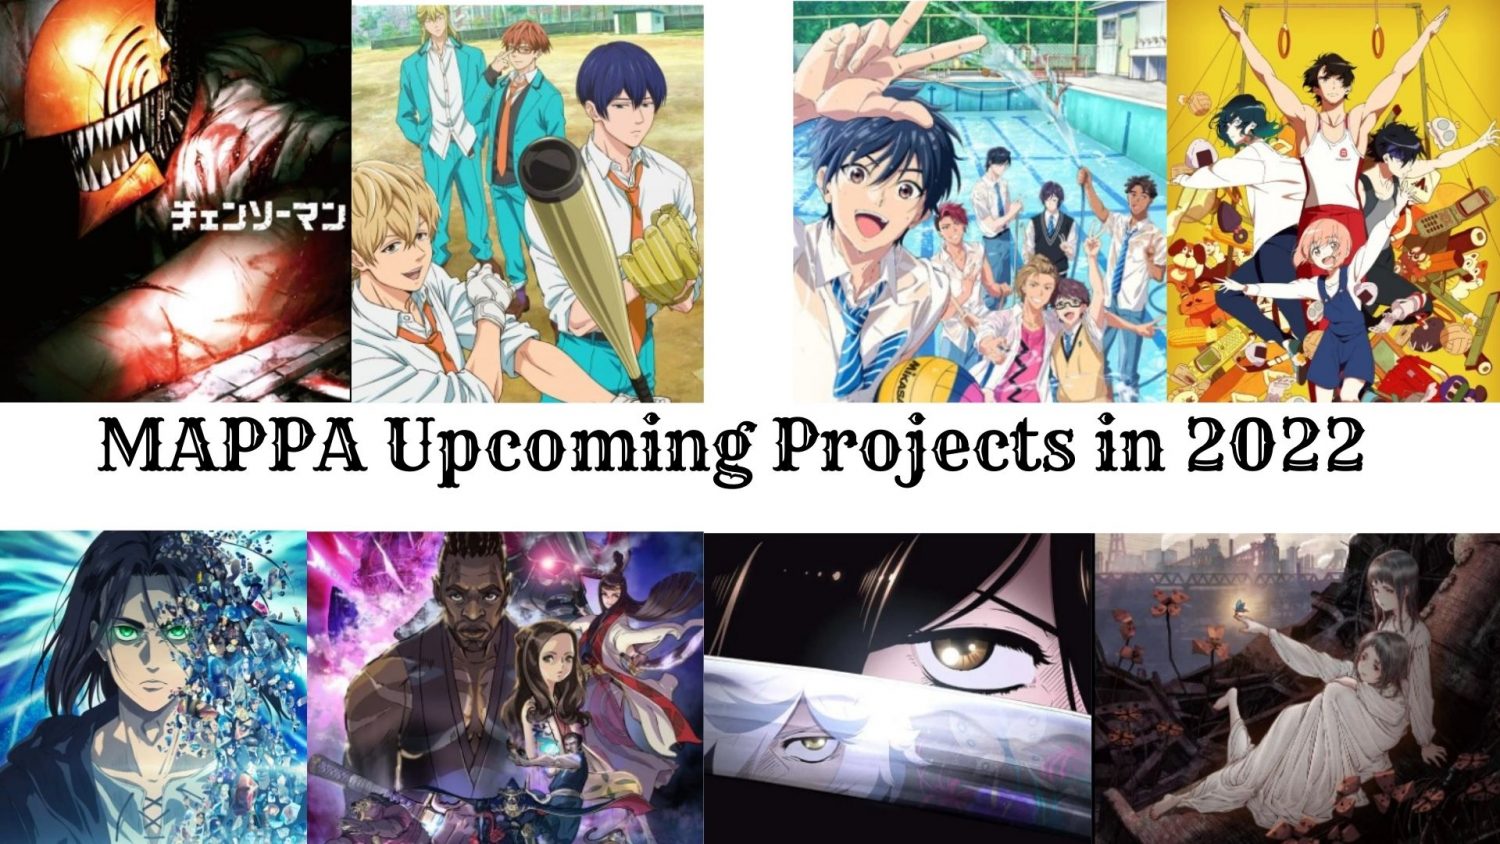 MAPPA upcoming projects in 2022